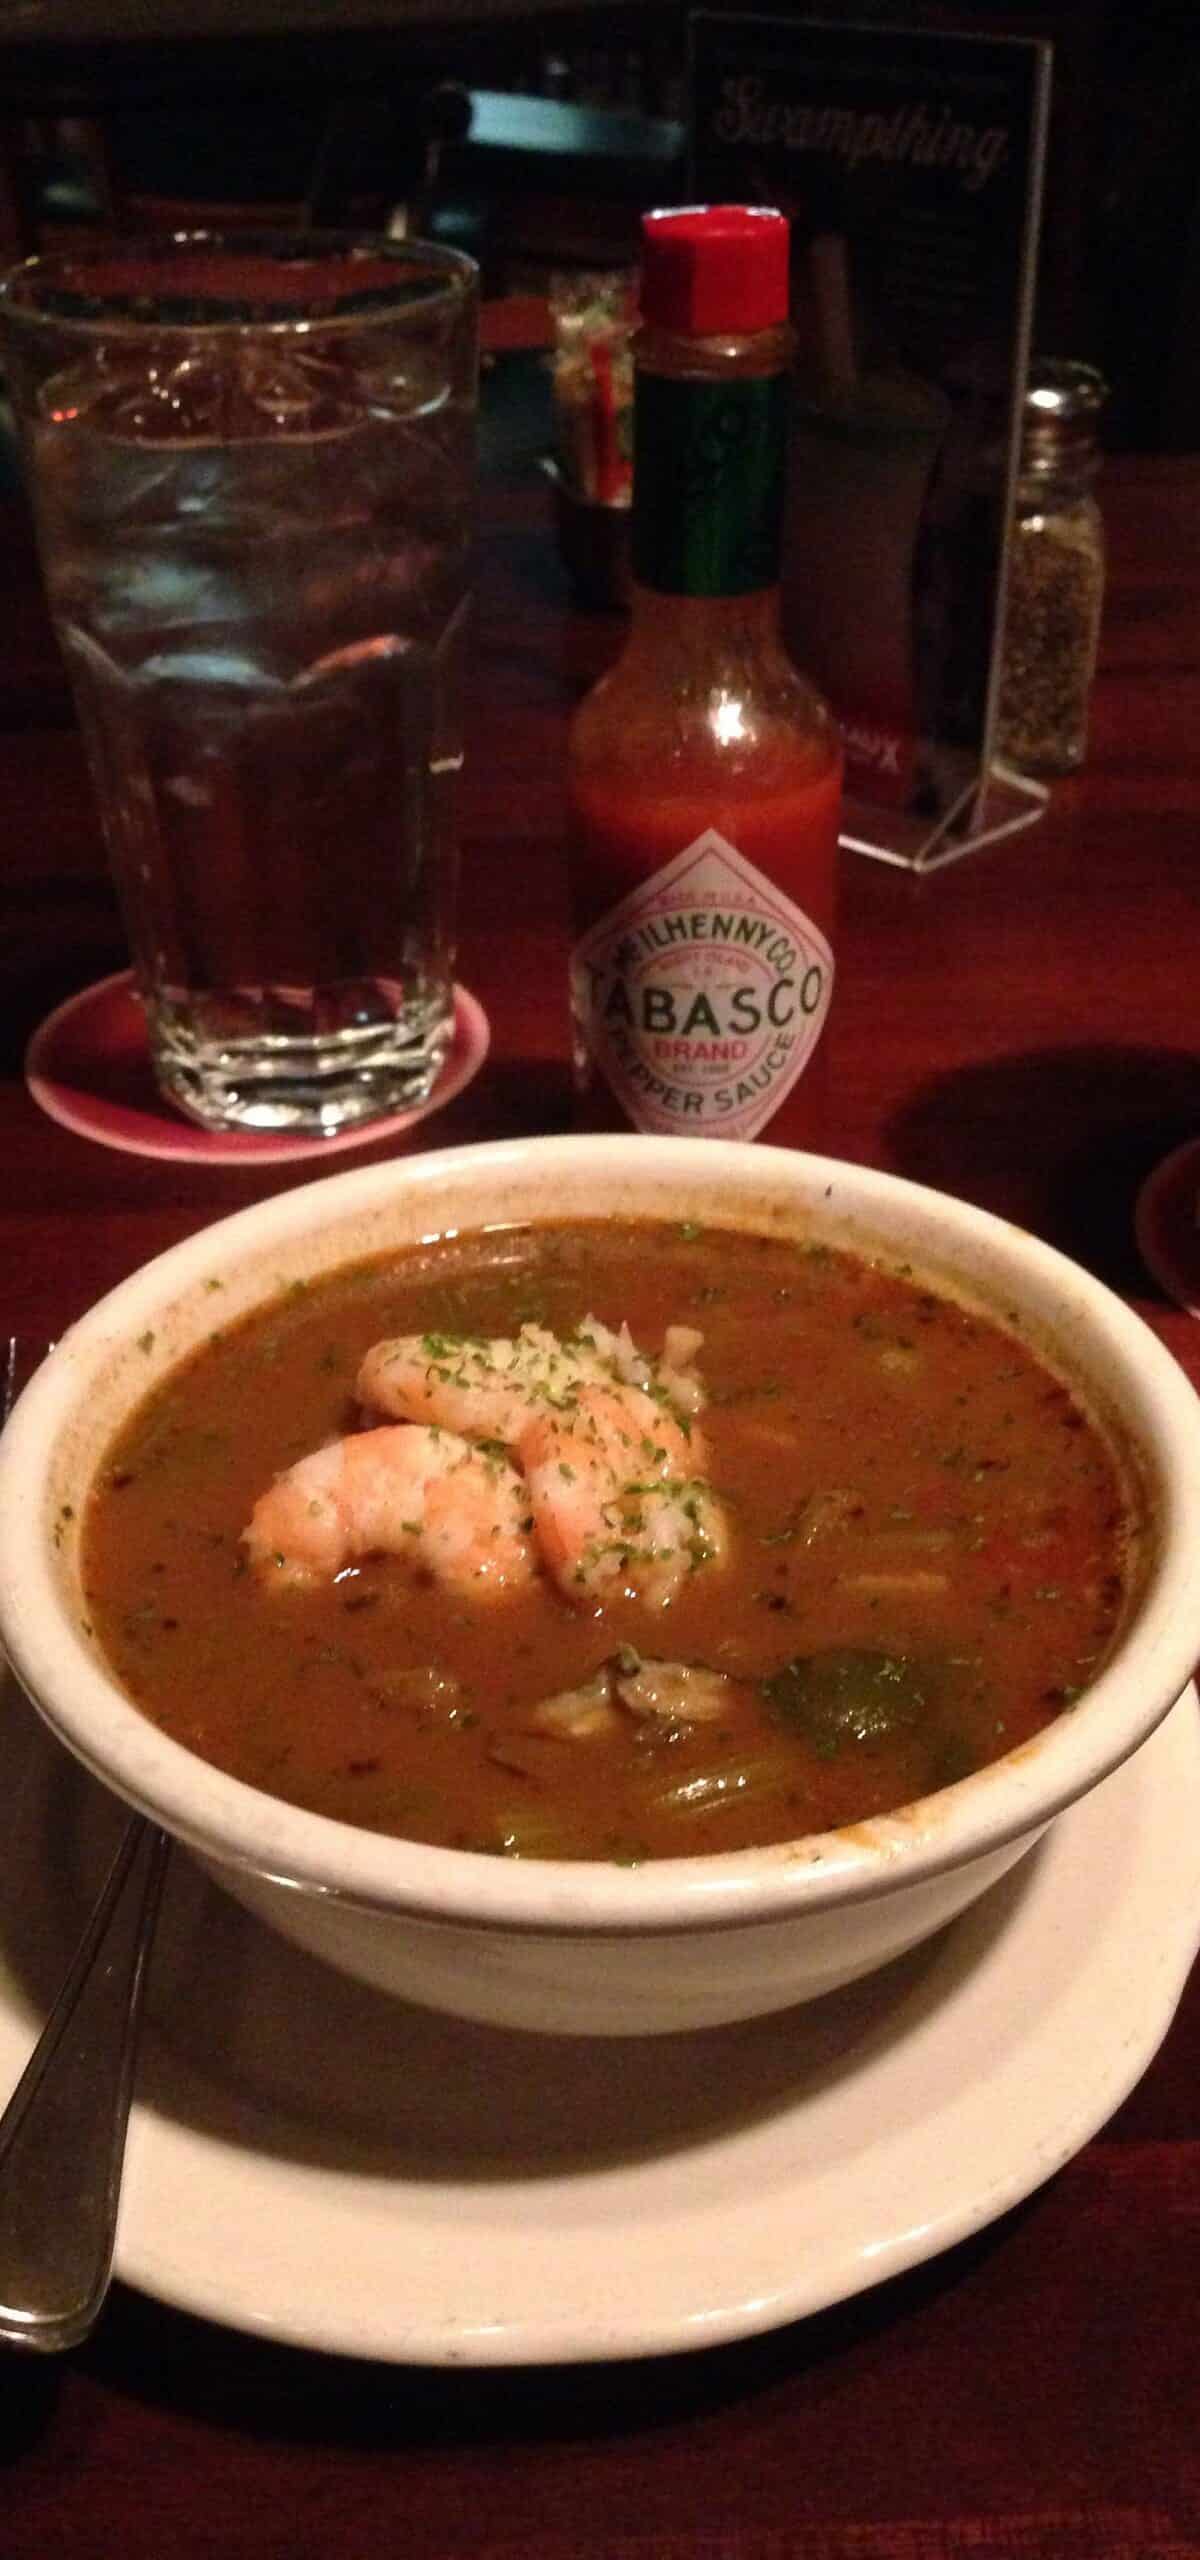  With generous helpings of crab, shrimp, and oysters, this gumbo is a seafood lover's dream.